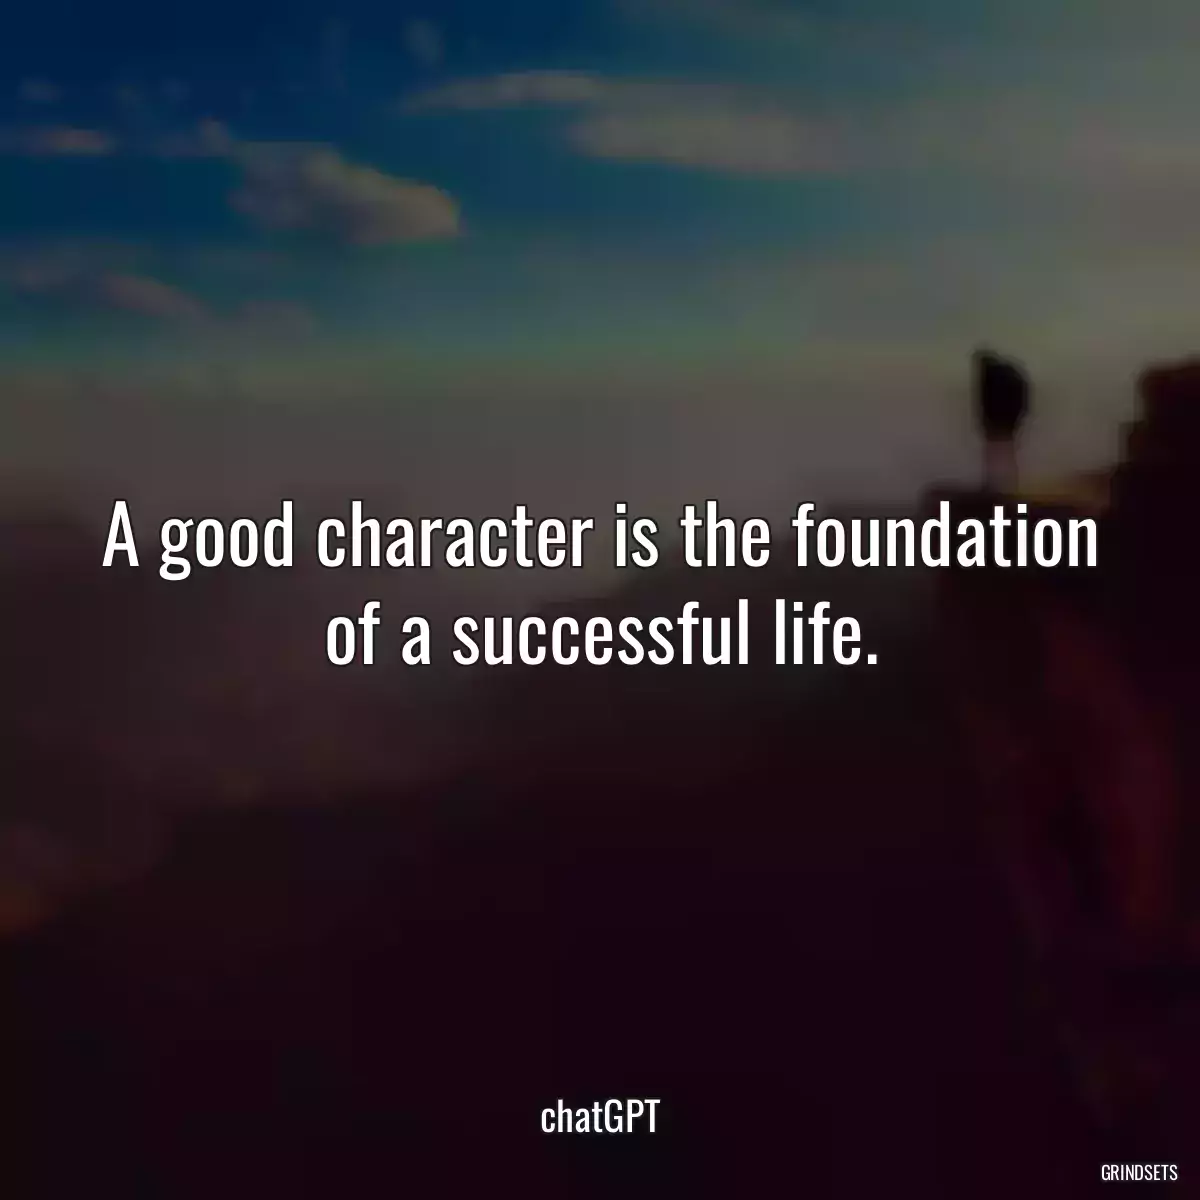 A good character is the foundation of a successful life.